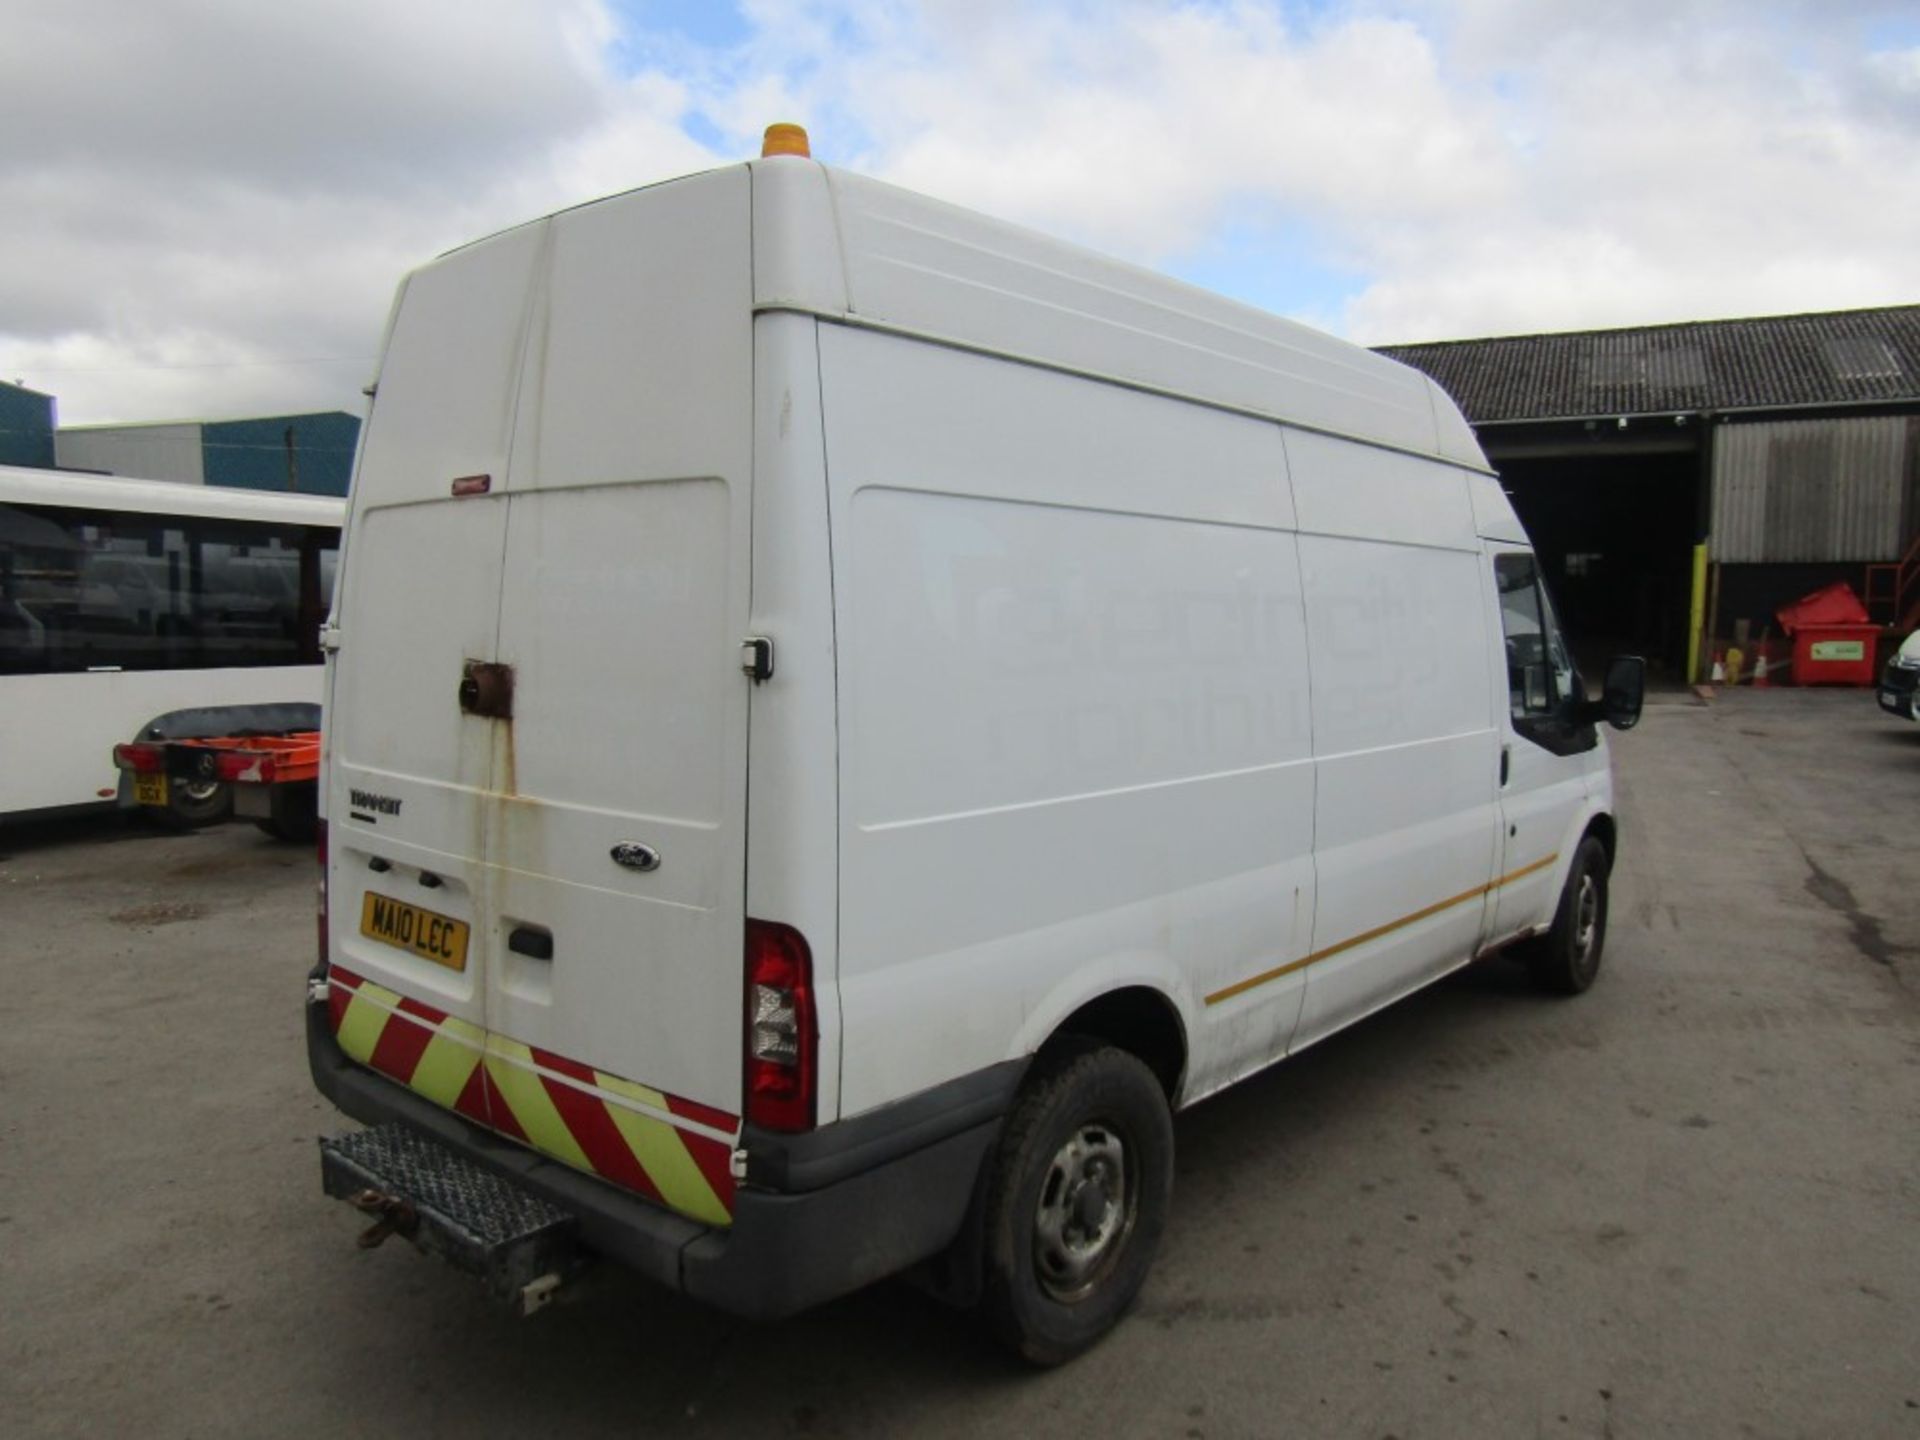 10 reg FORD TRANSIT 115 T350L RWD (NON RUNNER) (DIRECT ELECTRICITY NW) 1ST REG 04/10, 101155M - Image 4 of 7